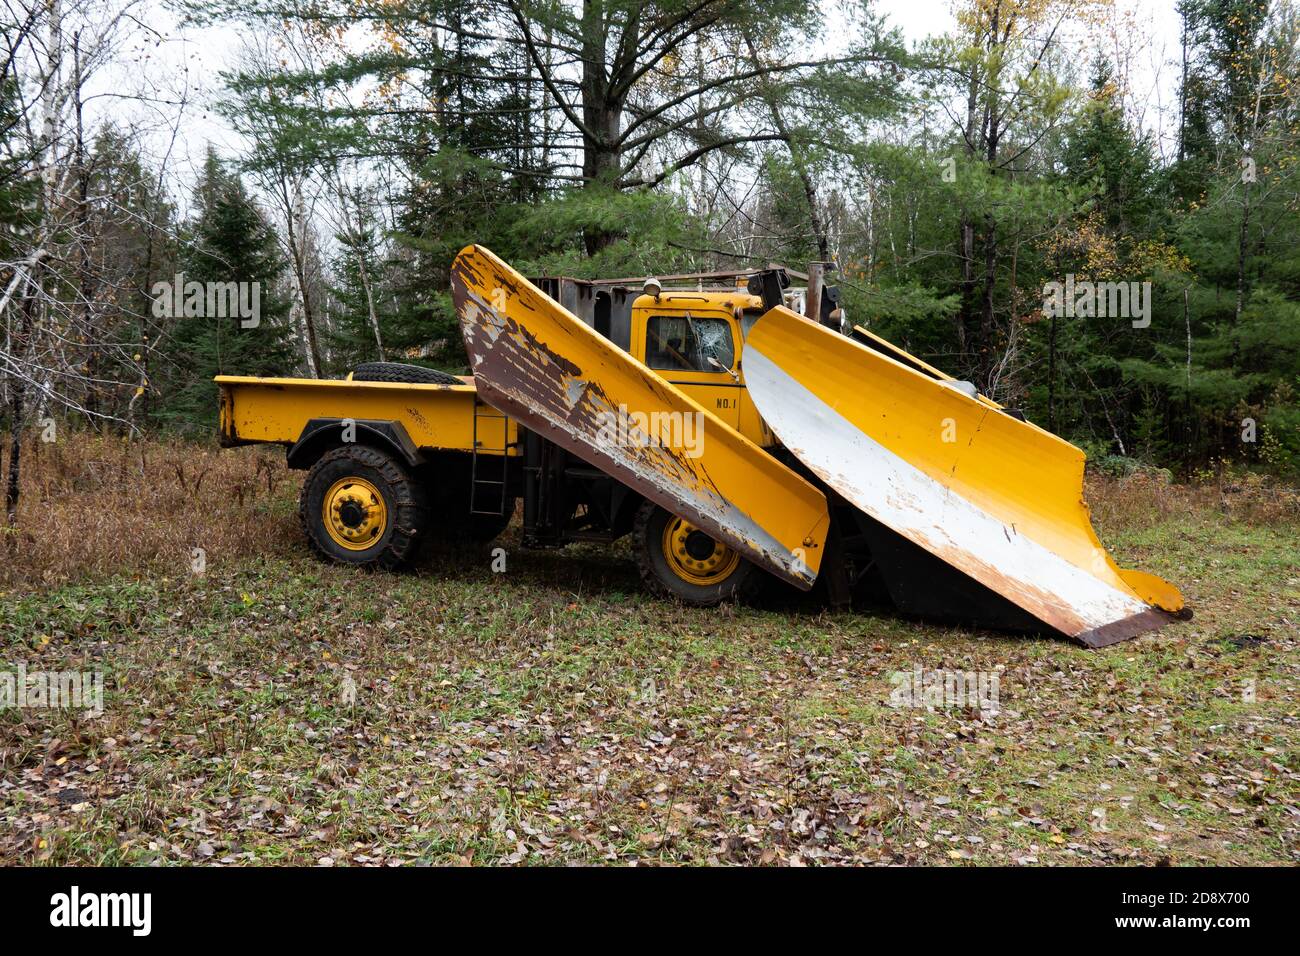 An old heavy-duty snow plow truck parked in a remote area of the Adirondack Mountains, NY USA for use keeping logging roads open in winter. Stock Photo